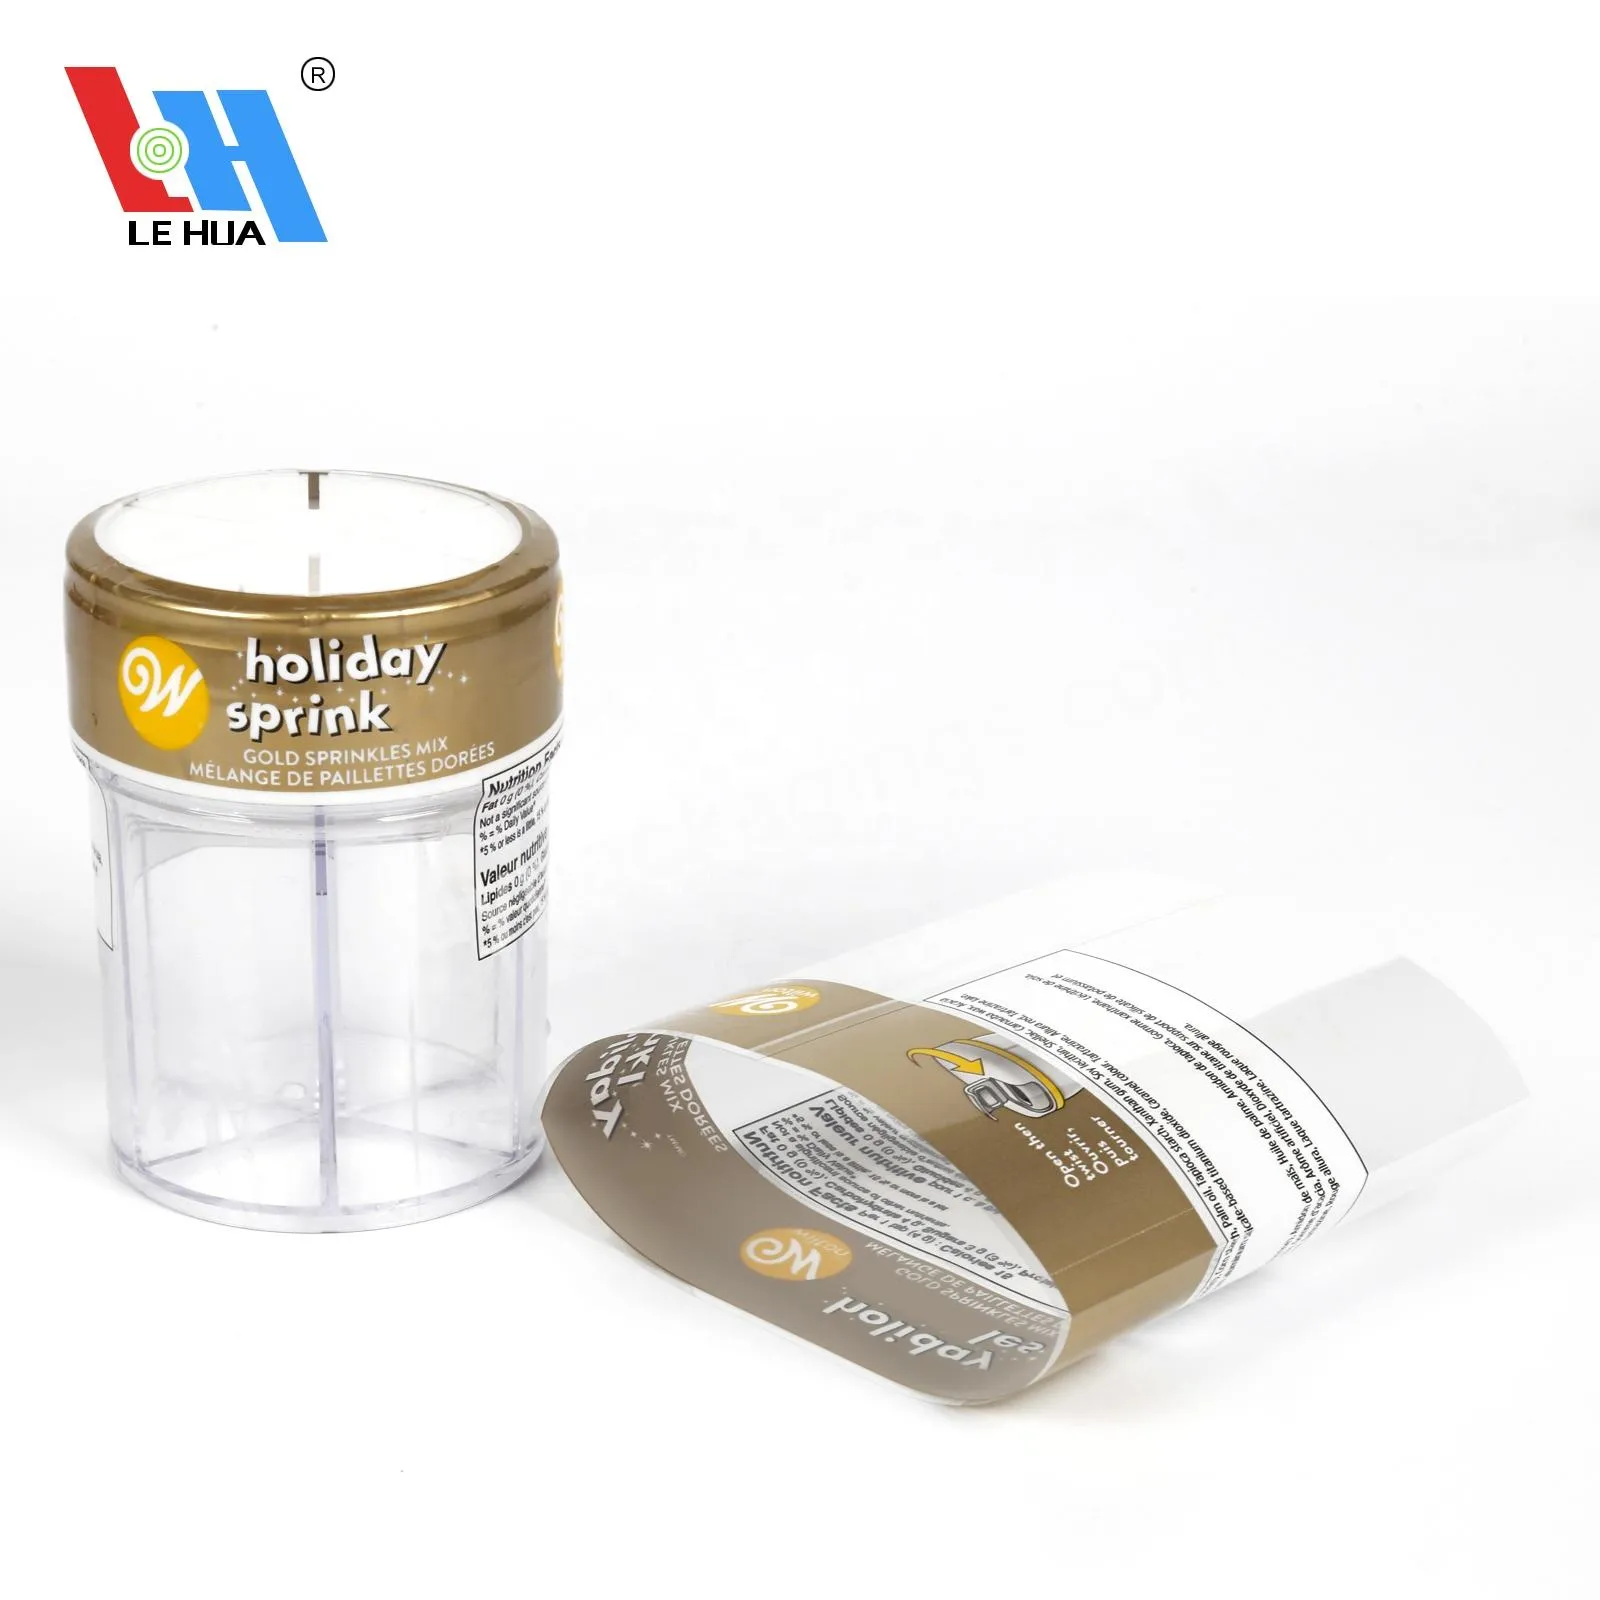 Custom Design Hot Sale Perforated Tamper Proof Seal Pvc Thermal Shrink Sleeve Label For Candy Bottle Cans - Buy Shrink Sleeves Label,Pvc Shrink Sleeve Label For Candy Bottle,Custom Shrink Sleeves Label.